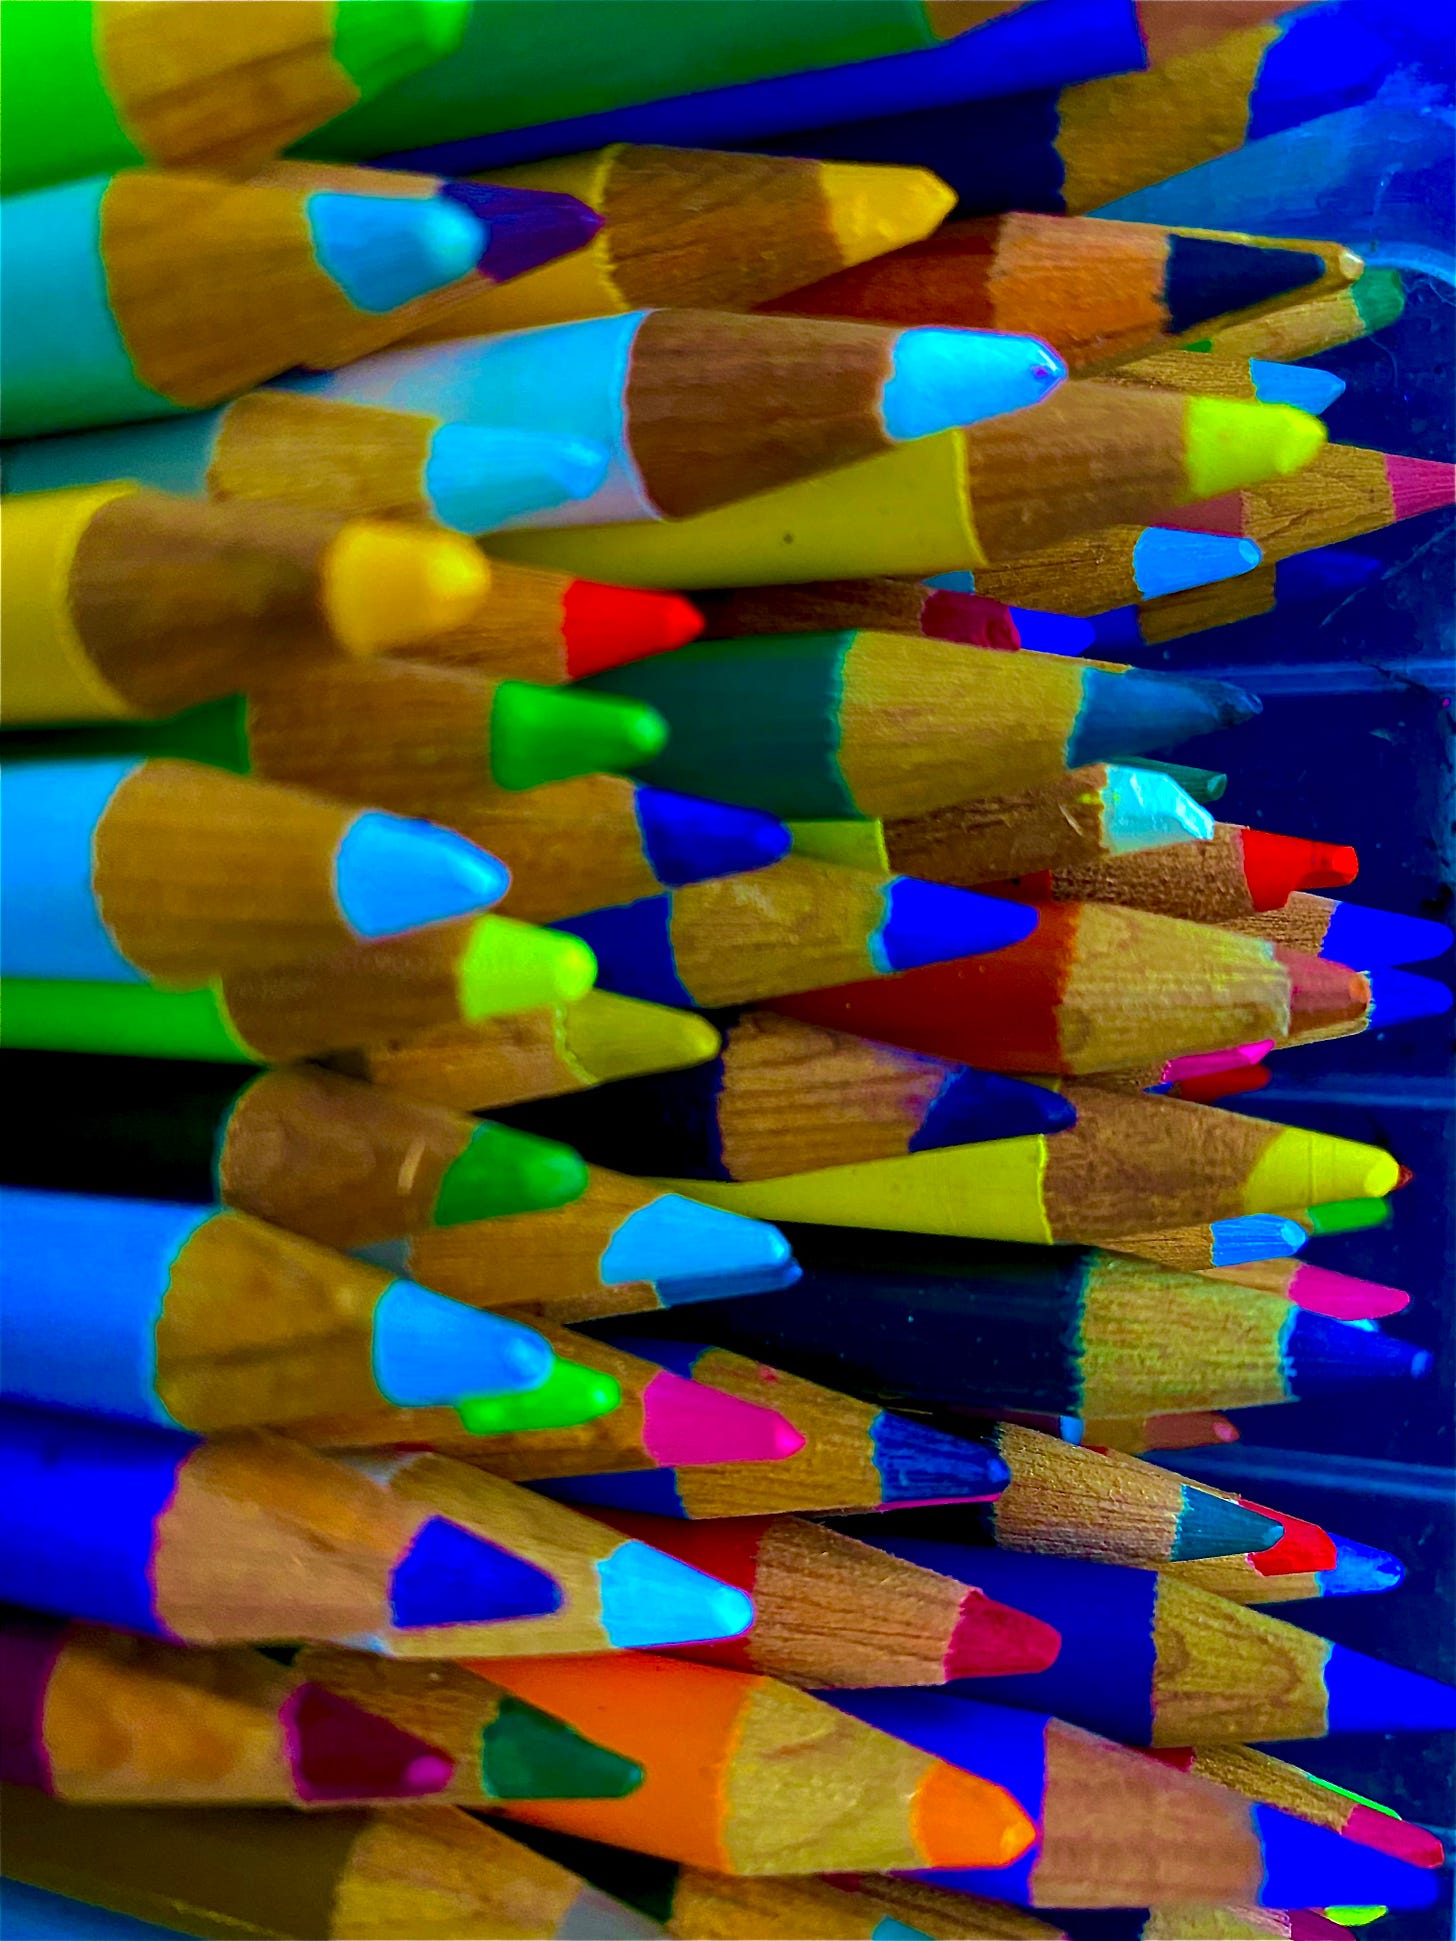 A closeup view of brightly coloured pencil crayons edited to appear unusual in vibrant colours